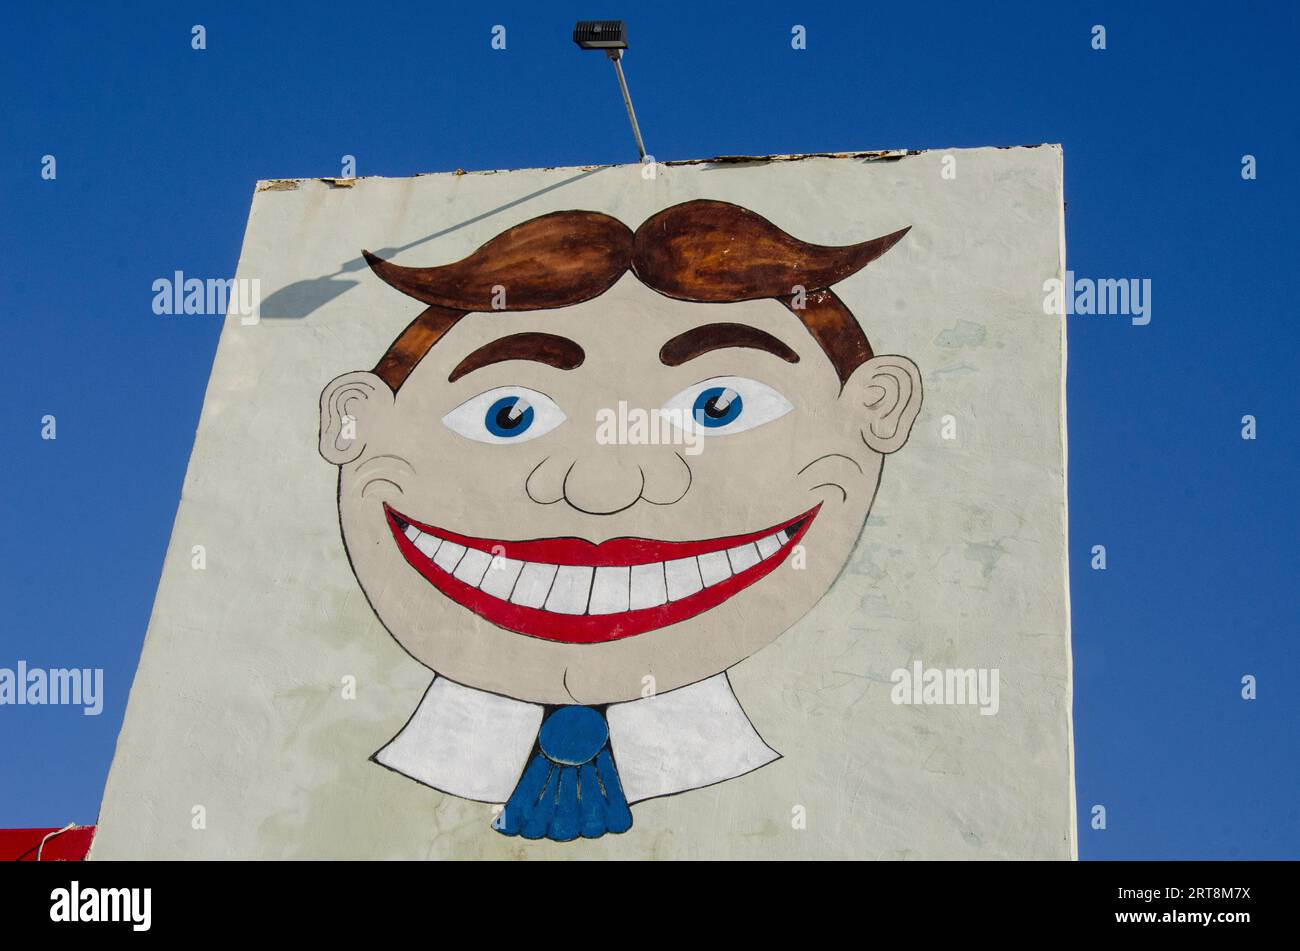 Tilly is painted on the Wonder Bar in Asbury Park, NJ Stock Photo